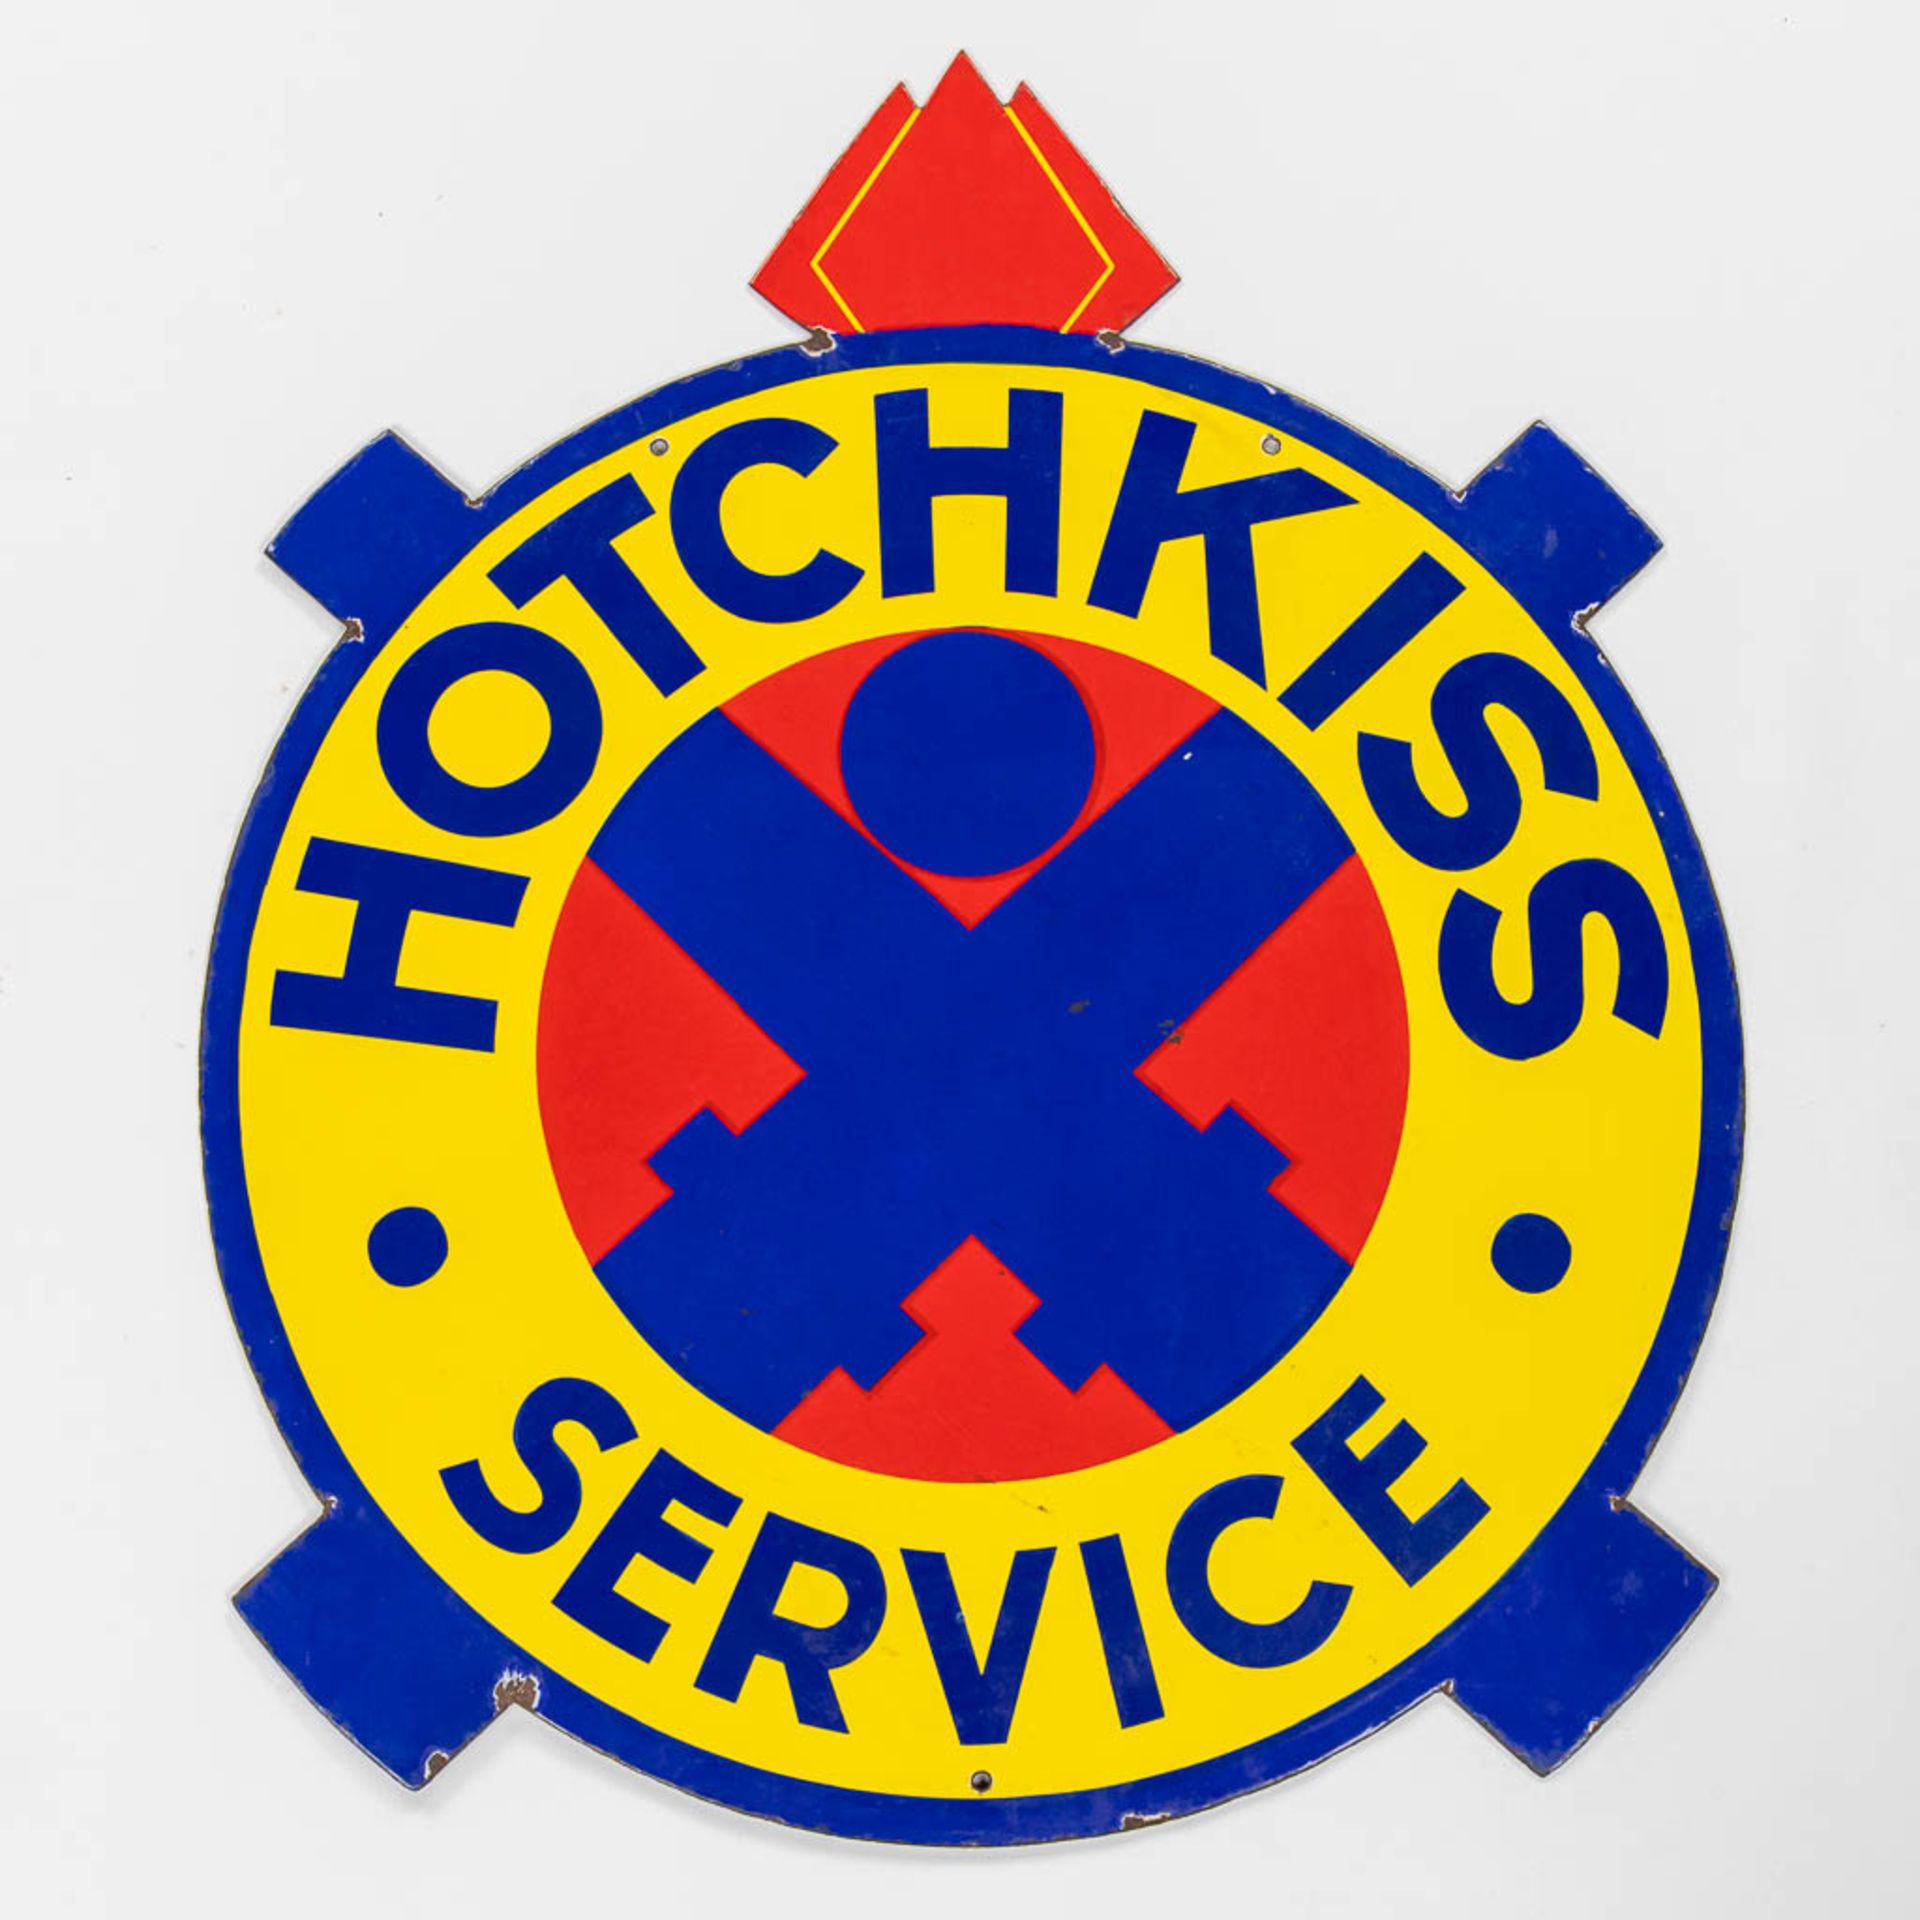 Hotchkiss Service emaillerie Alsacience, a double sided enamel plate. (W: 77 x H: 93 cm)